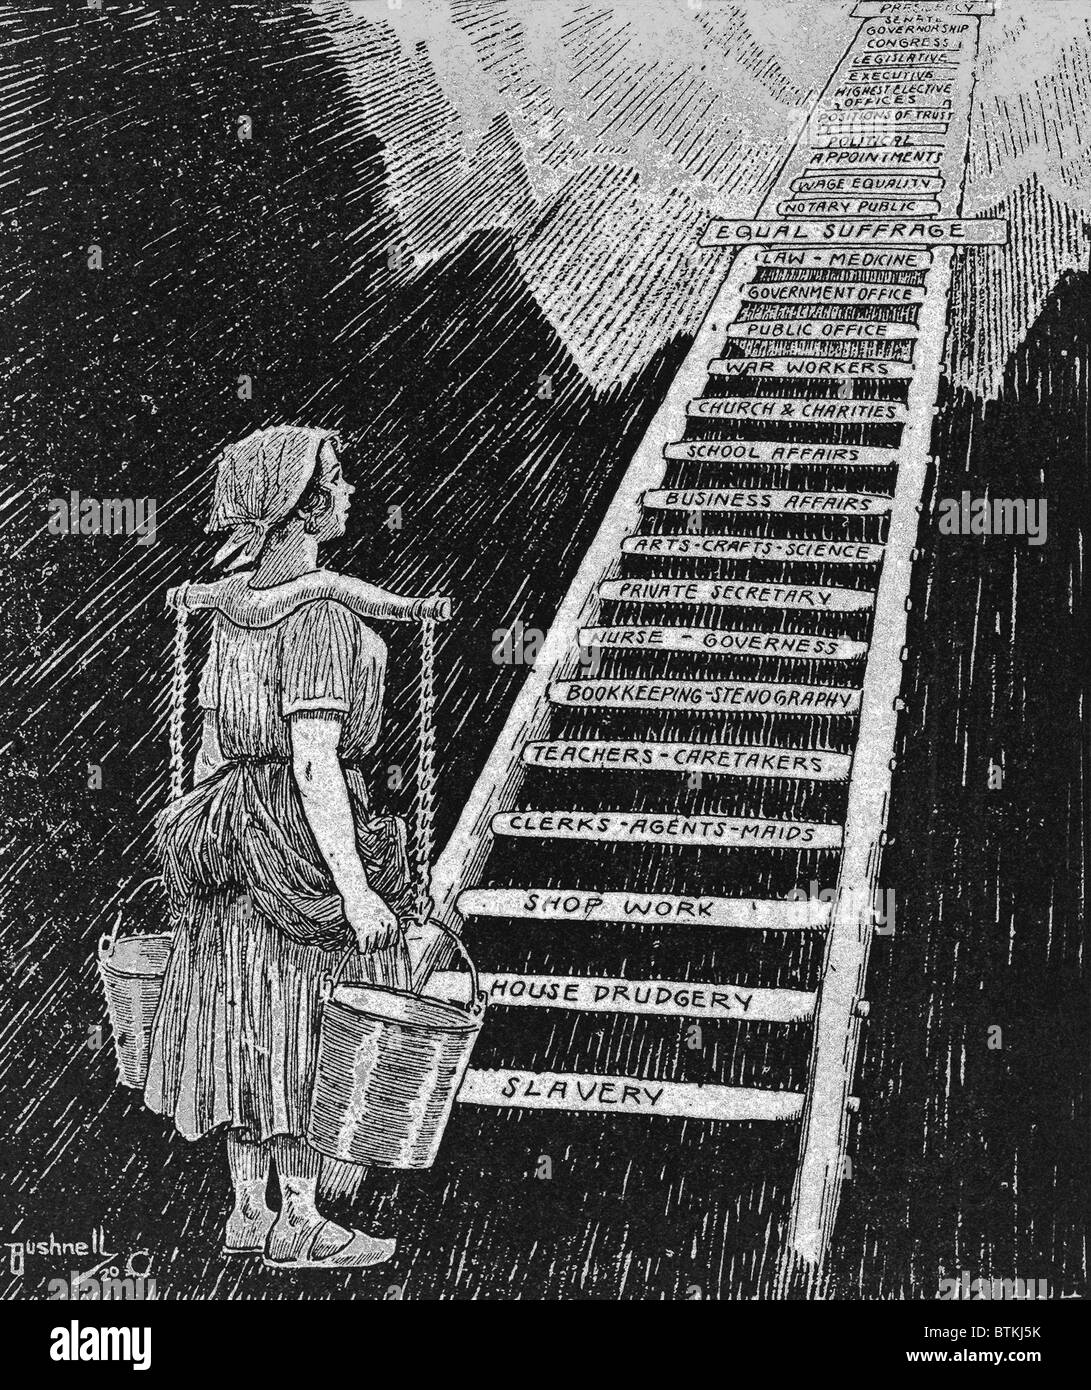 Political cartoon entitled, THE SKY IS NOW HER LIMIT, illustrating steps of women's progress from Slavery and House drudgery to Stock Photo